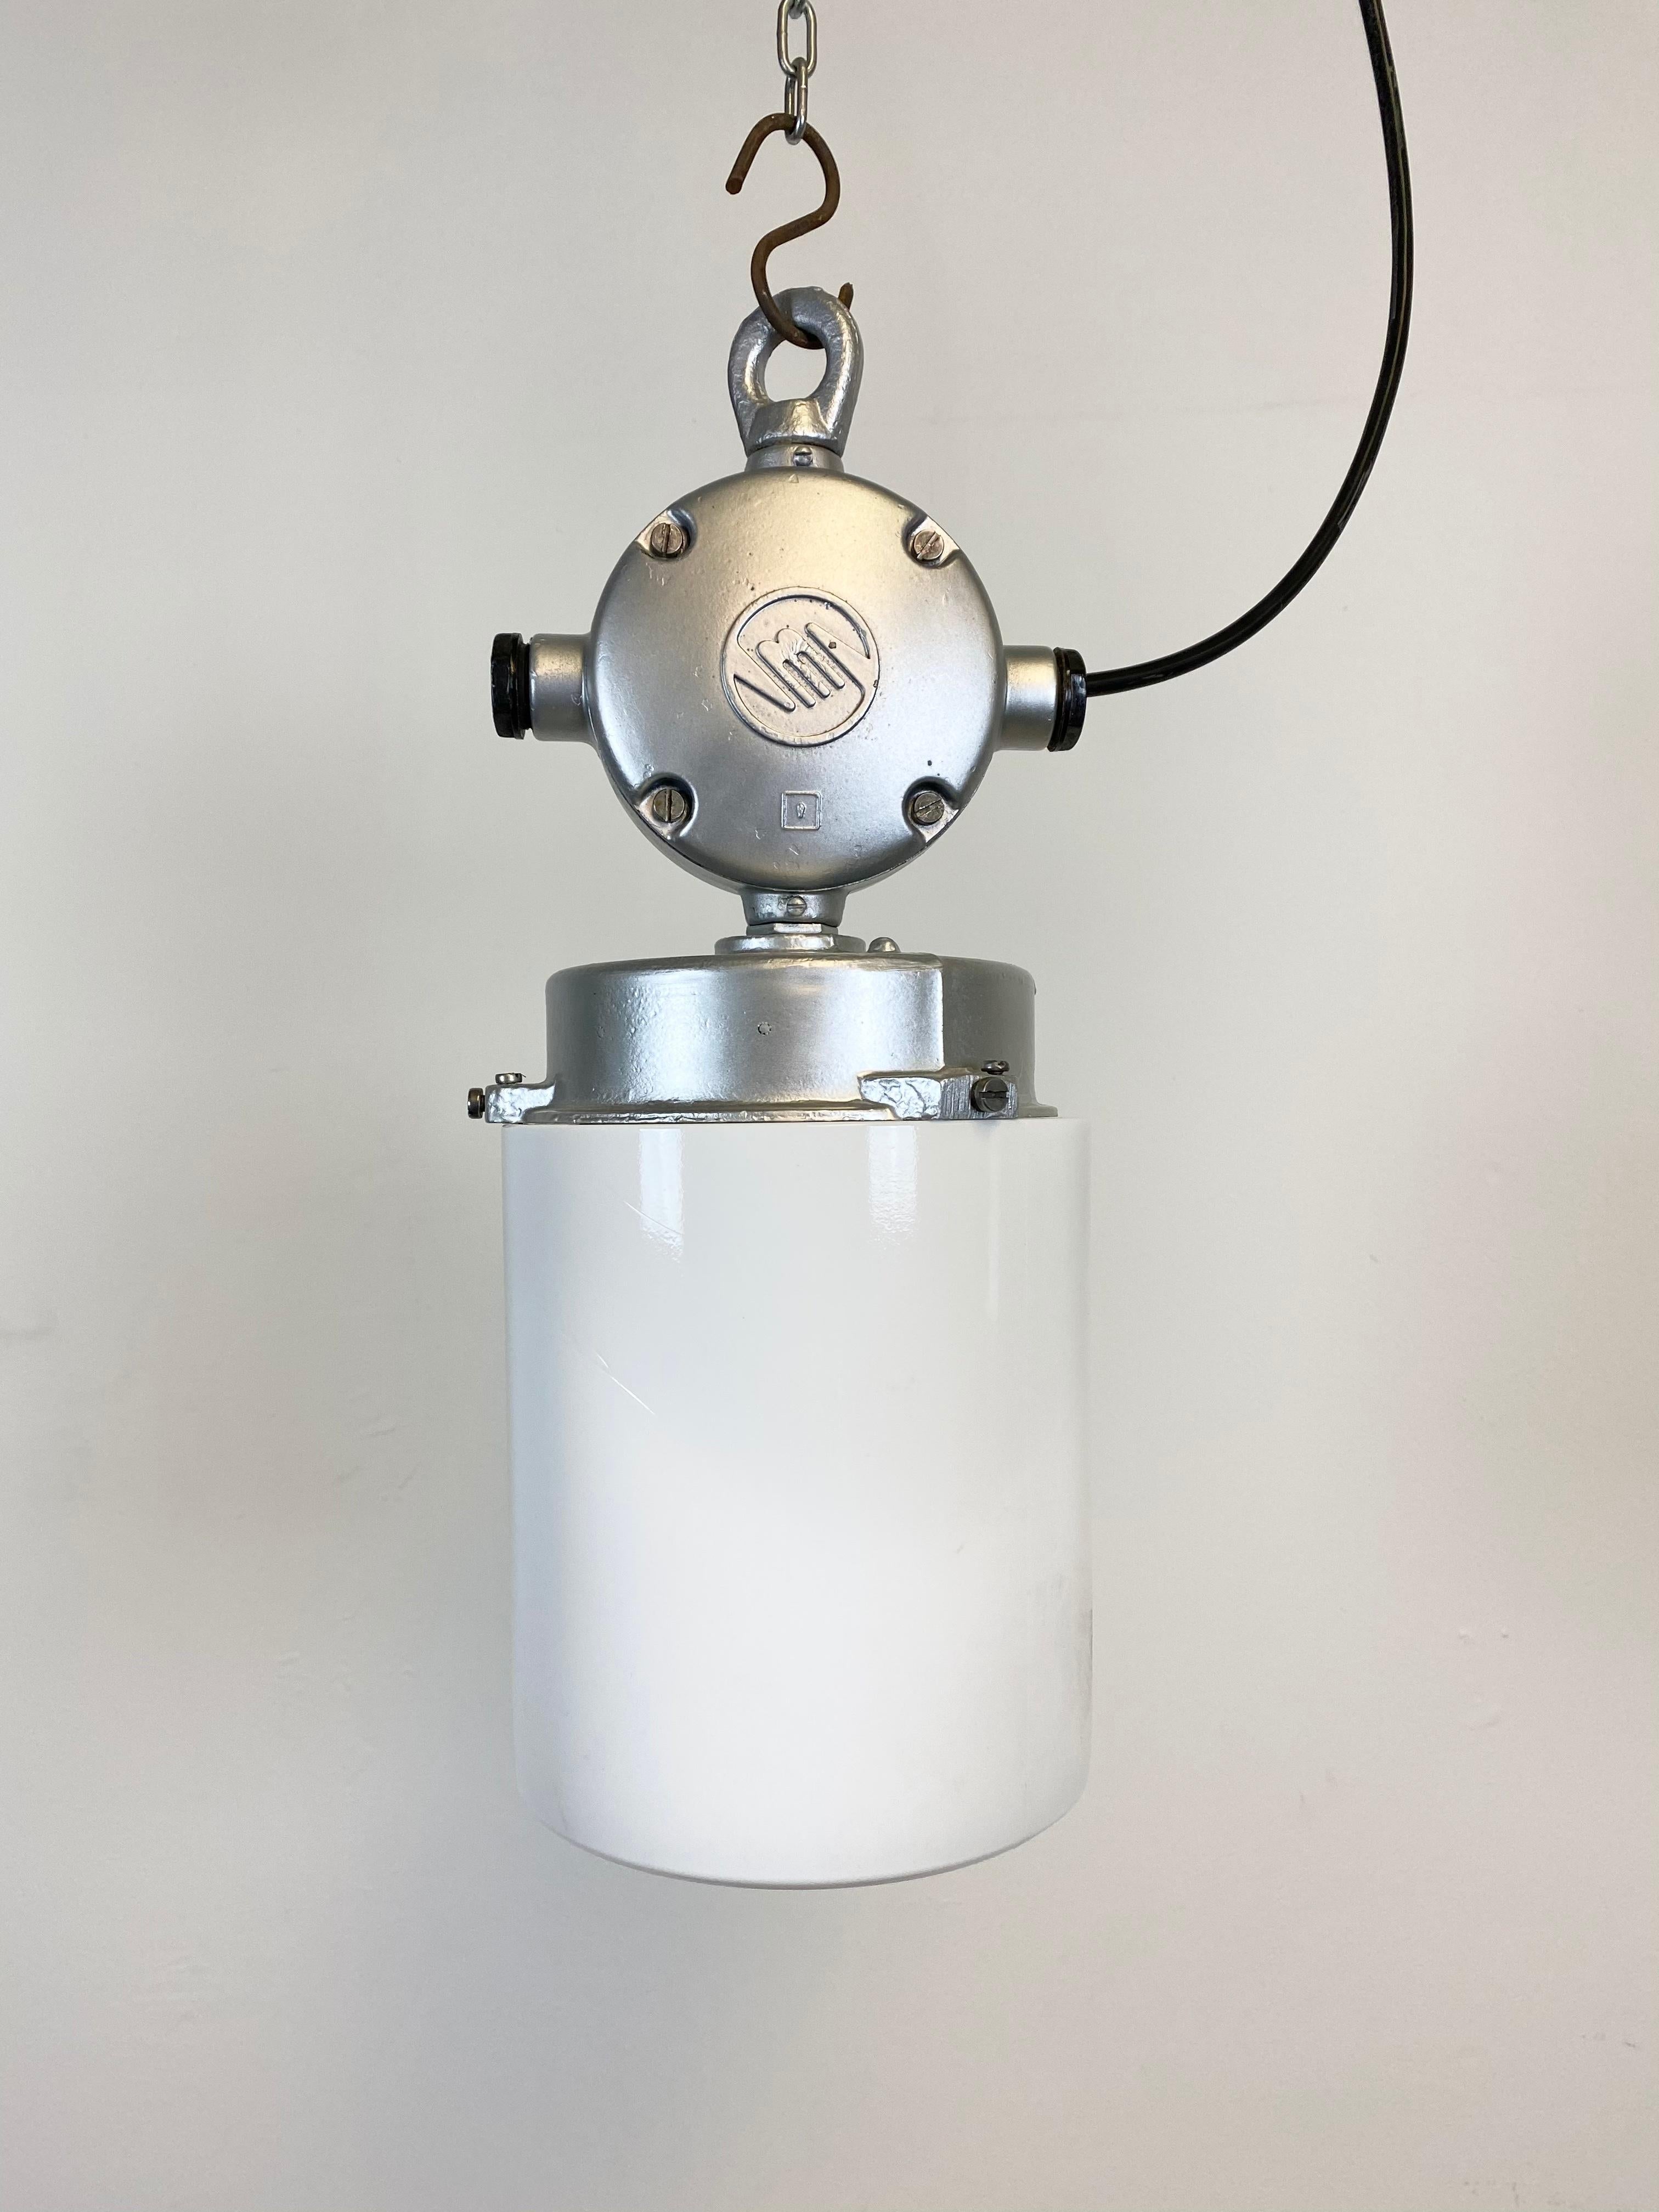 This industrial lamp in aluminium with milk glass was produced during the 1970s in former Czechoslovakia. It features a cast aluminium top and a milk glass. New porcelain socket for E 27 lightbulbs and wire. The weight of the lamp is 2 kg.